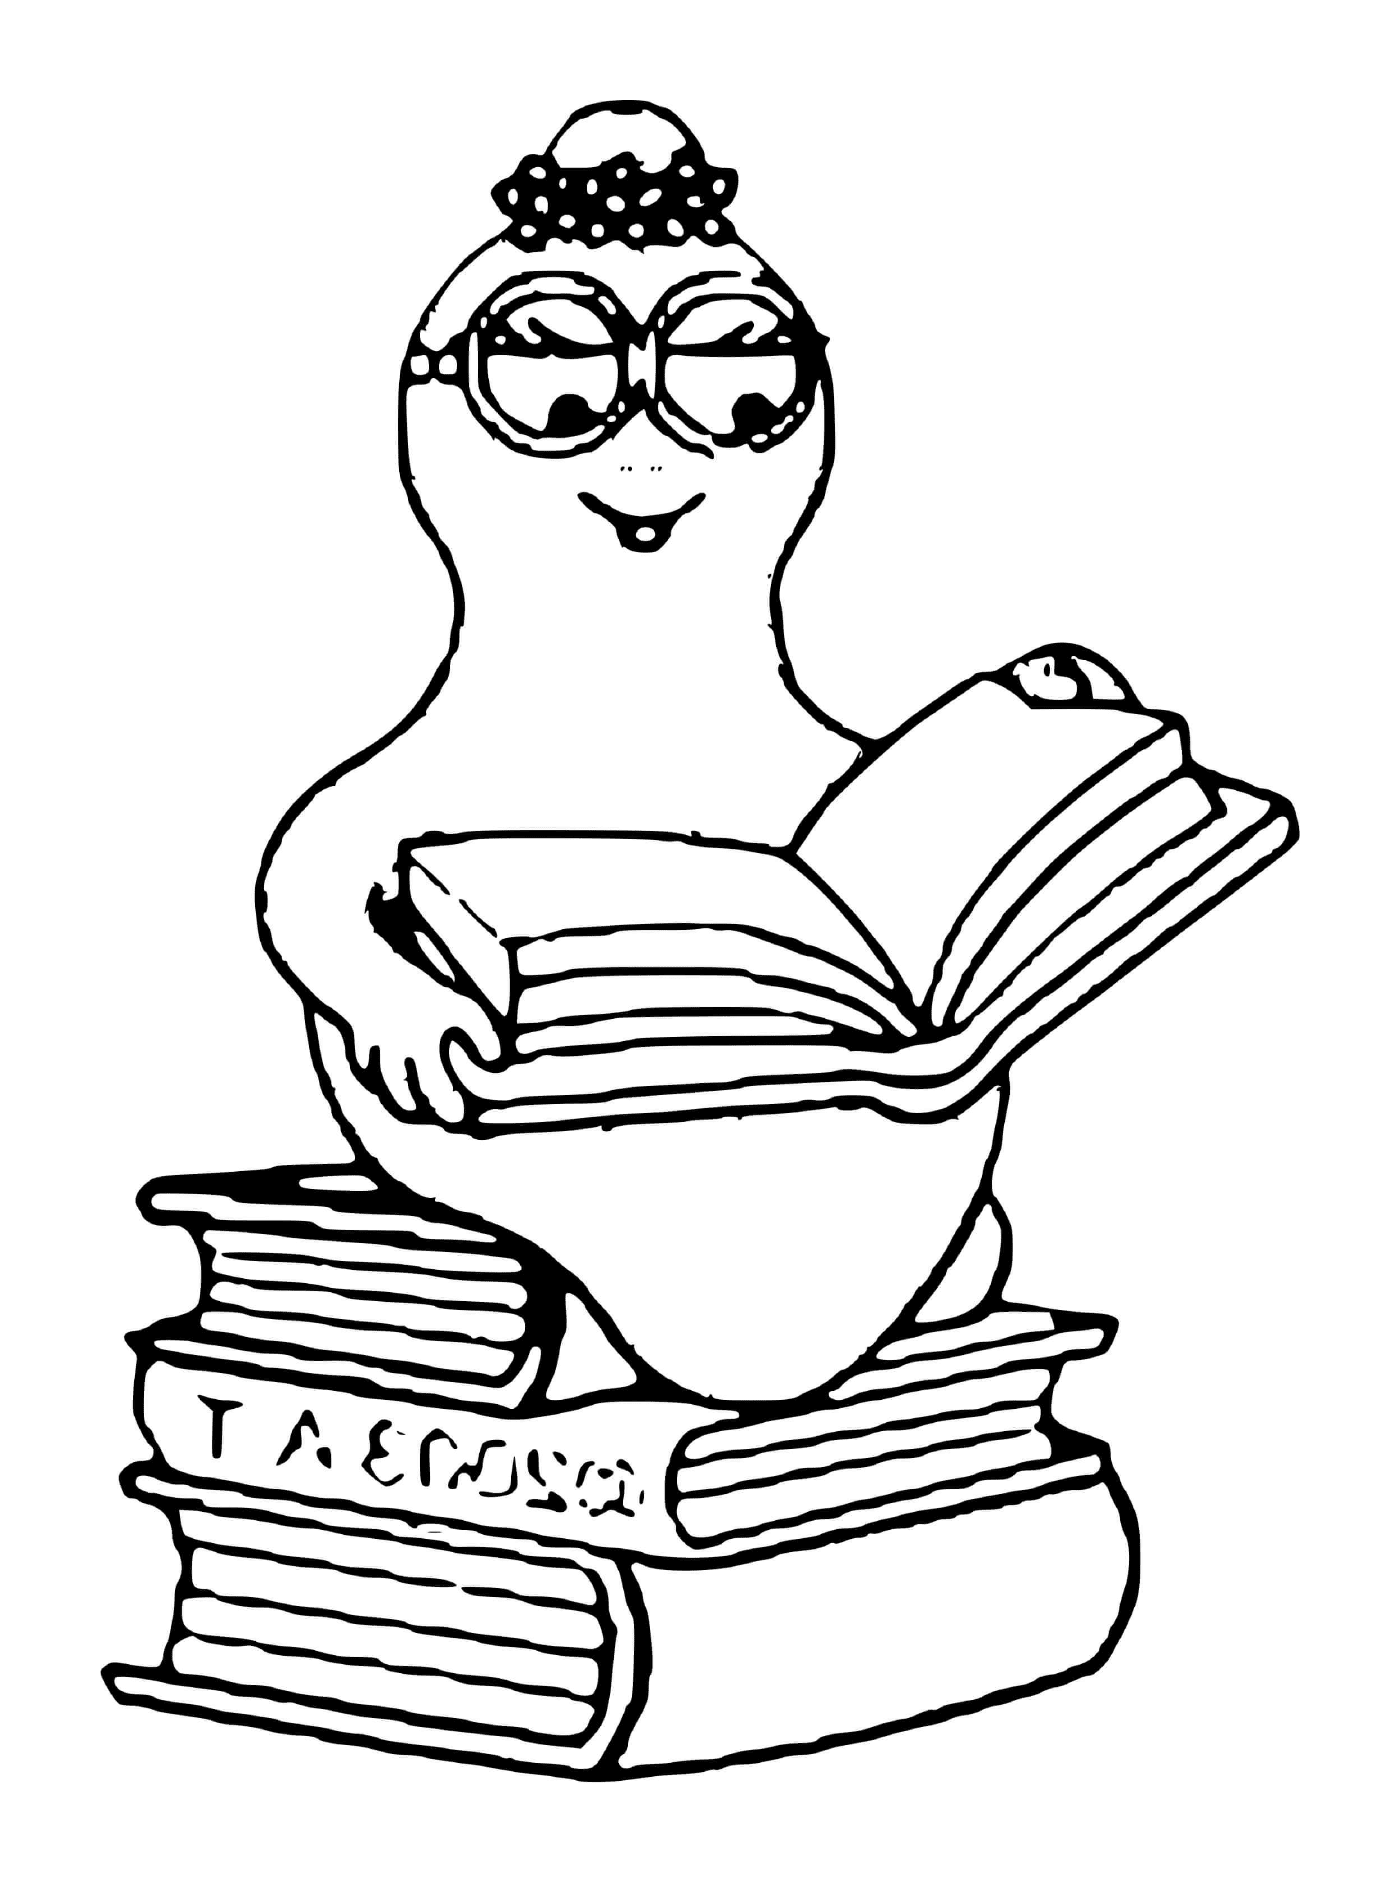  A person sitting on a pile of books 